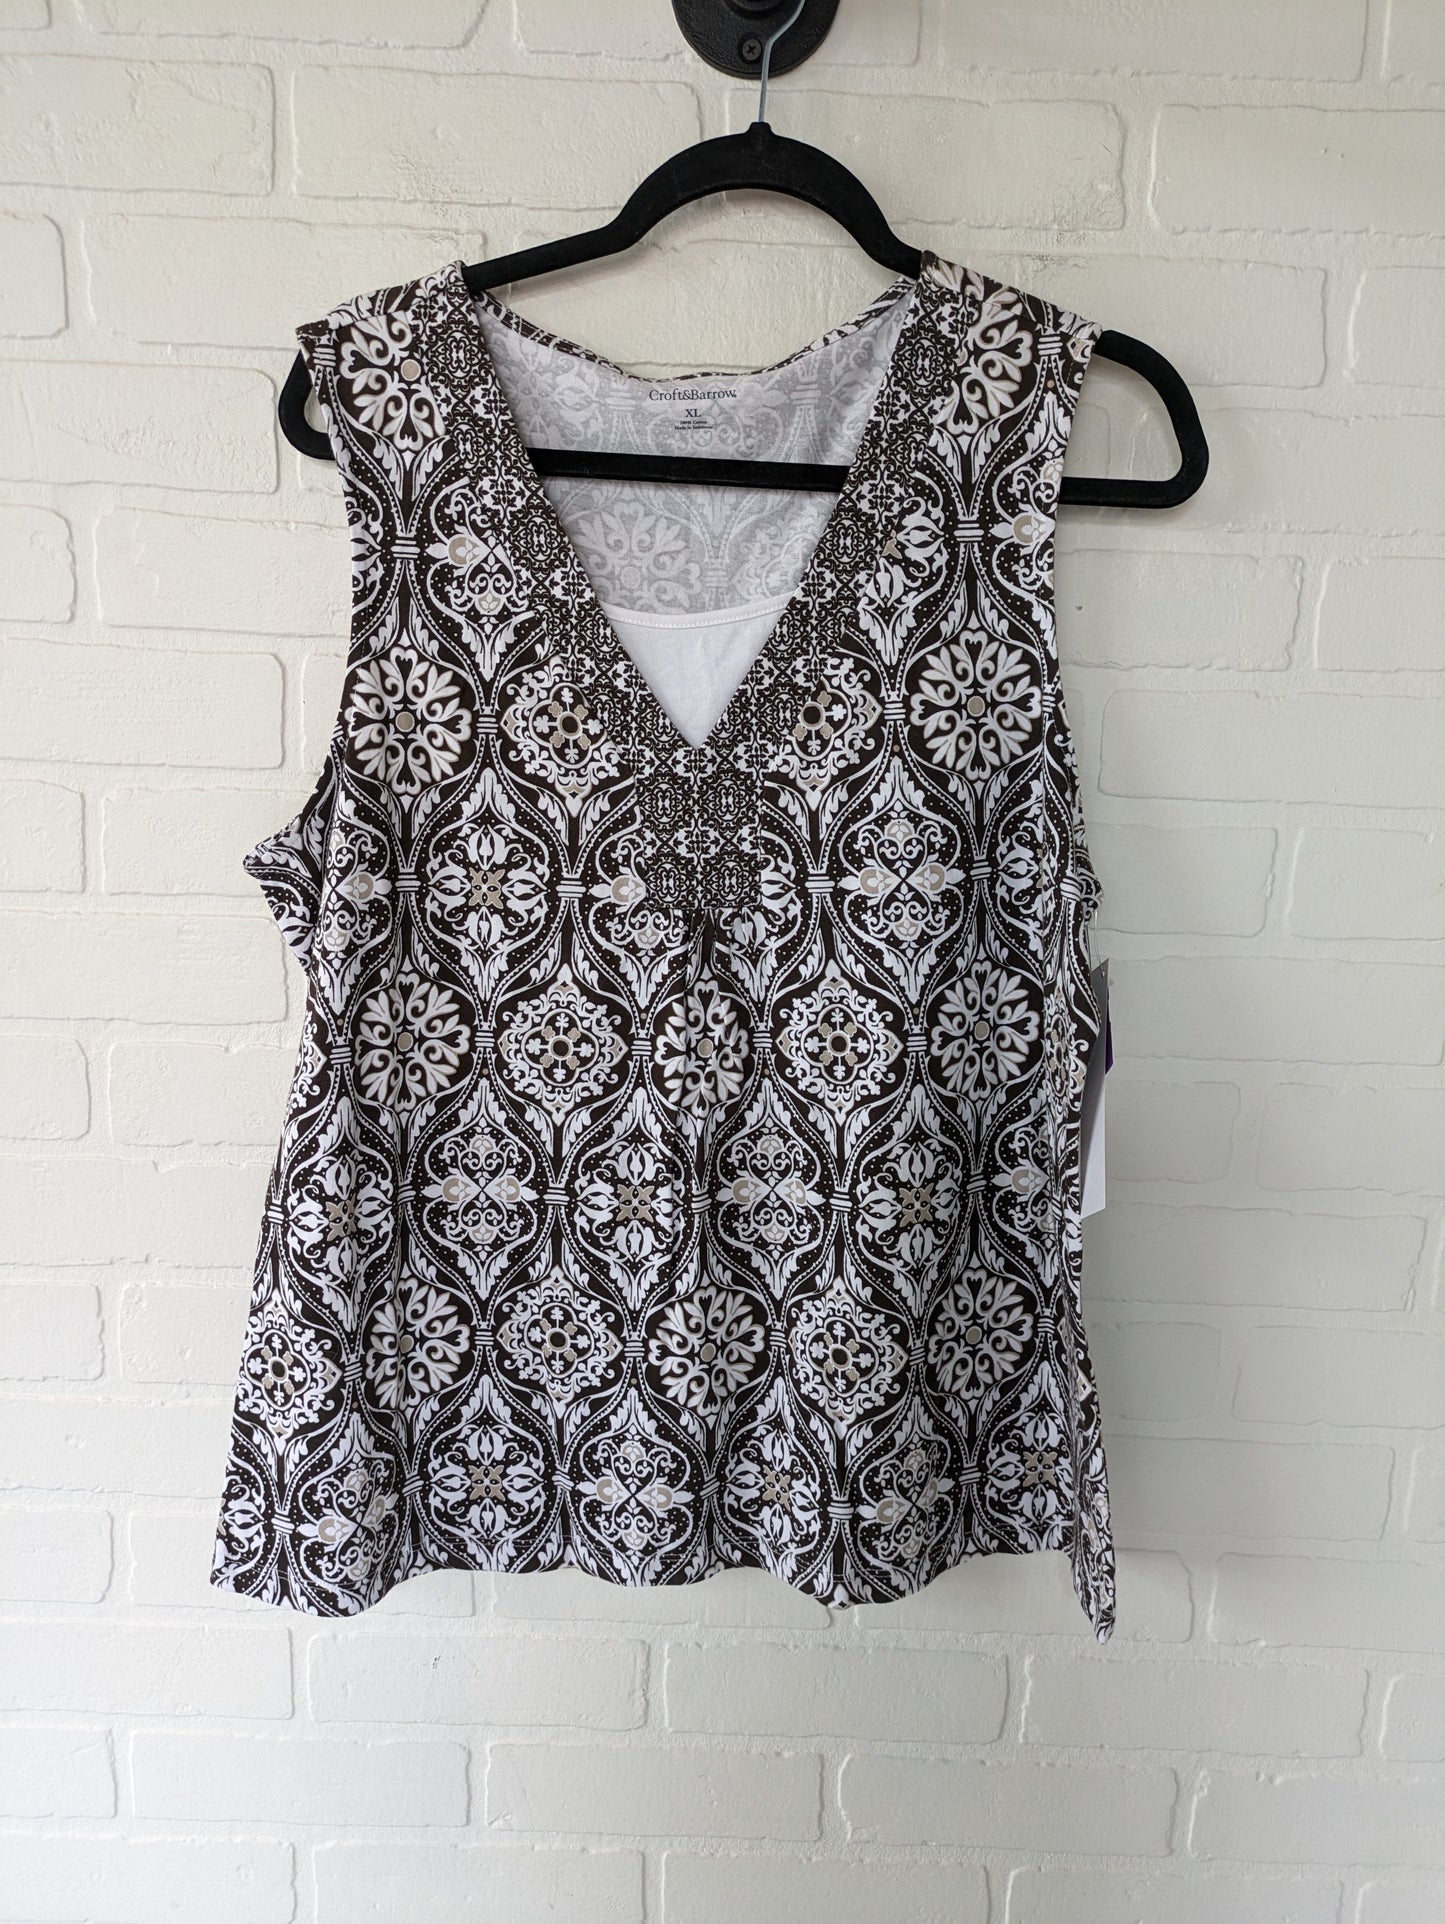 Brown & White Top Sleeveless Croft And Barrow, Size Xl